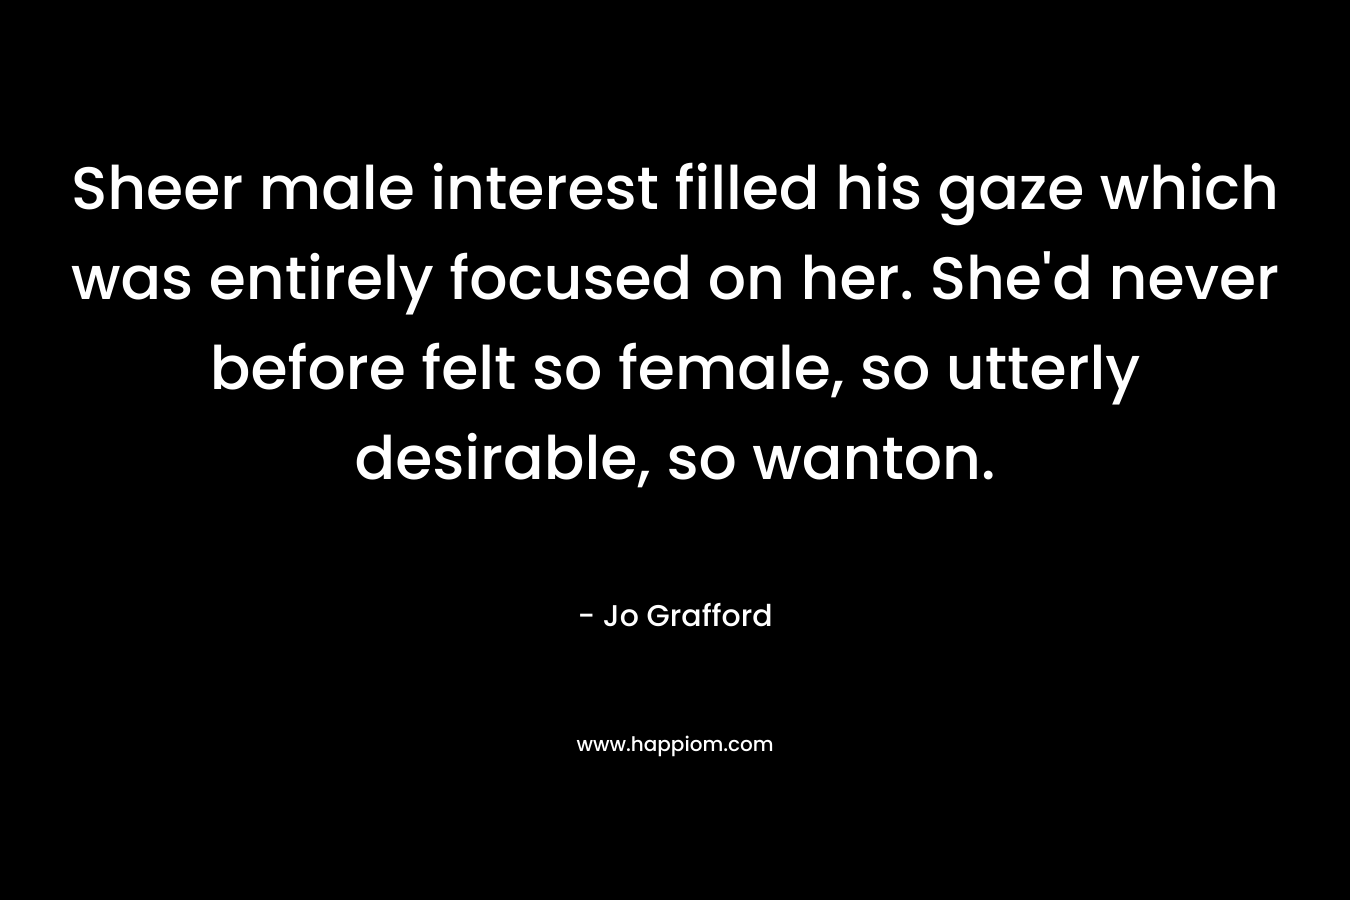 Sheer male interest filled his gaze which was entirely focused on her. She’d never before felt so female, so utterly desirable, so wanton. – Jo Grafford